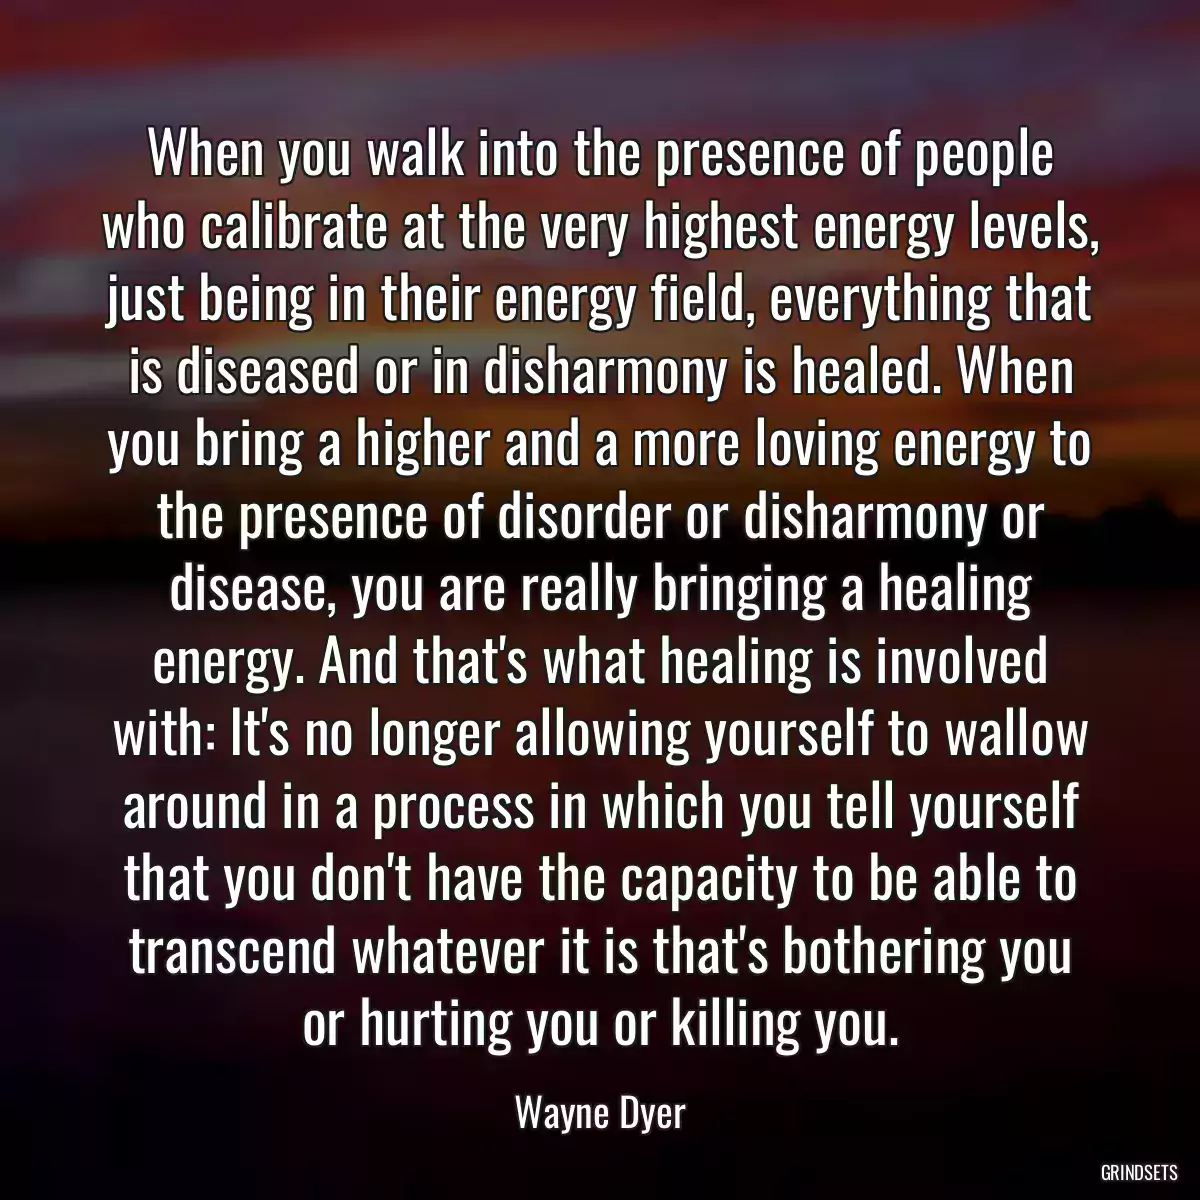 When you walk into the presence of people who calibrate at the very highest energy levels, just being in their energy field, everything that is diseased or in disharmony is healed. When you bring a higher and a more loving energy to the presence of disorder or disharmony or disease, you are really bringing a healing energy. And that\'s what healing is involved with: It\'s no longer allowing yourself to wallow around in a process in which you tell yourself that you don\'t have the capacity to be able to transcend whatever it is that\'s bothering you or hurting you or killing you.